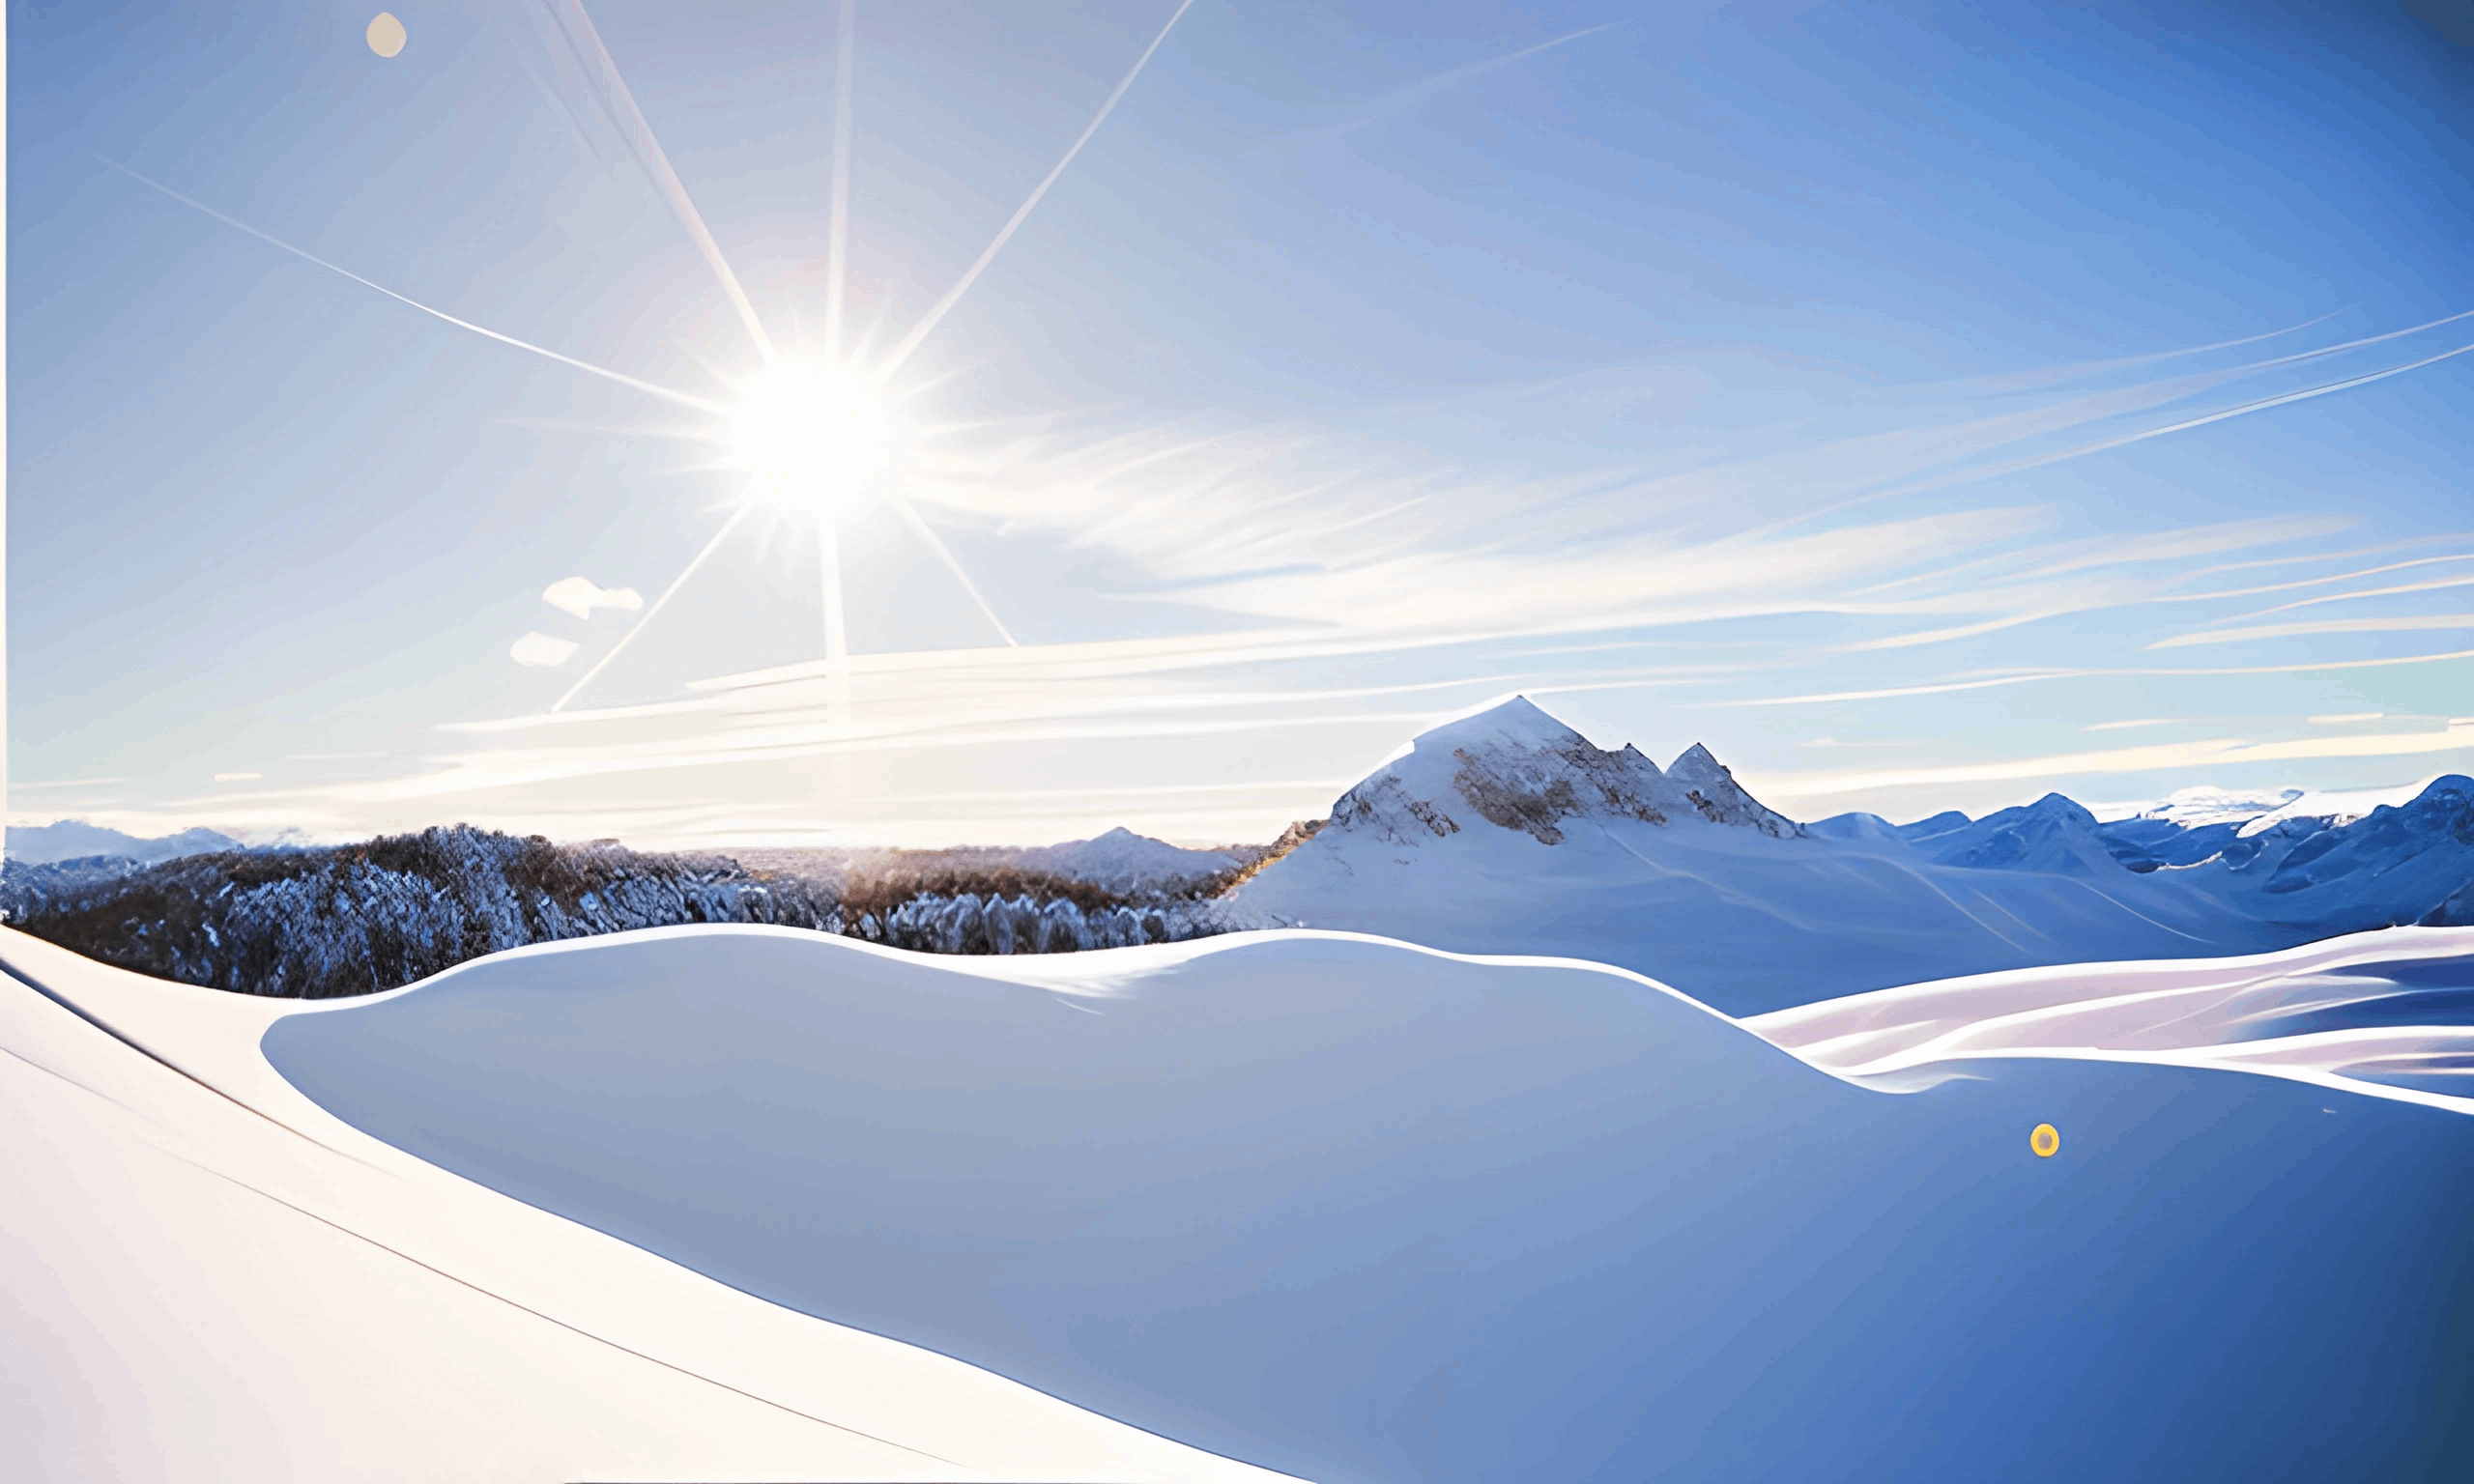 skiers are skiing down a snowy mountain with the sun shining